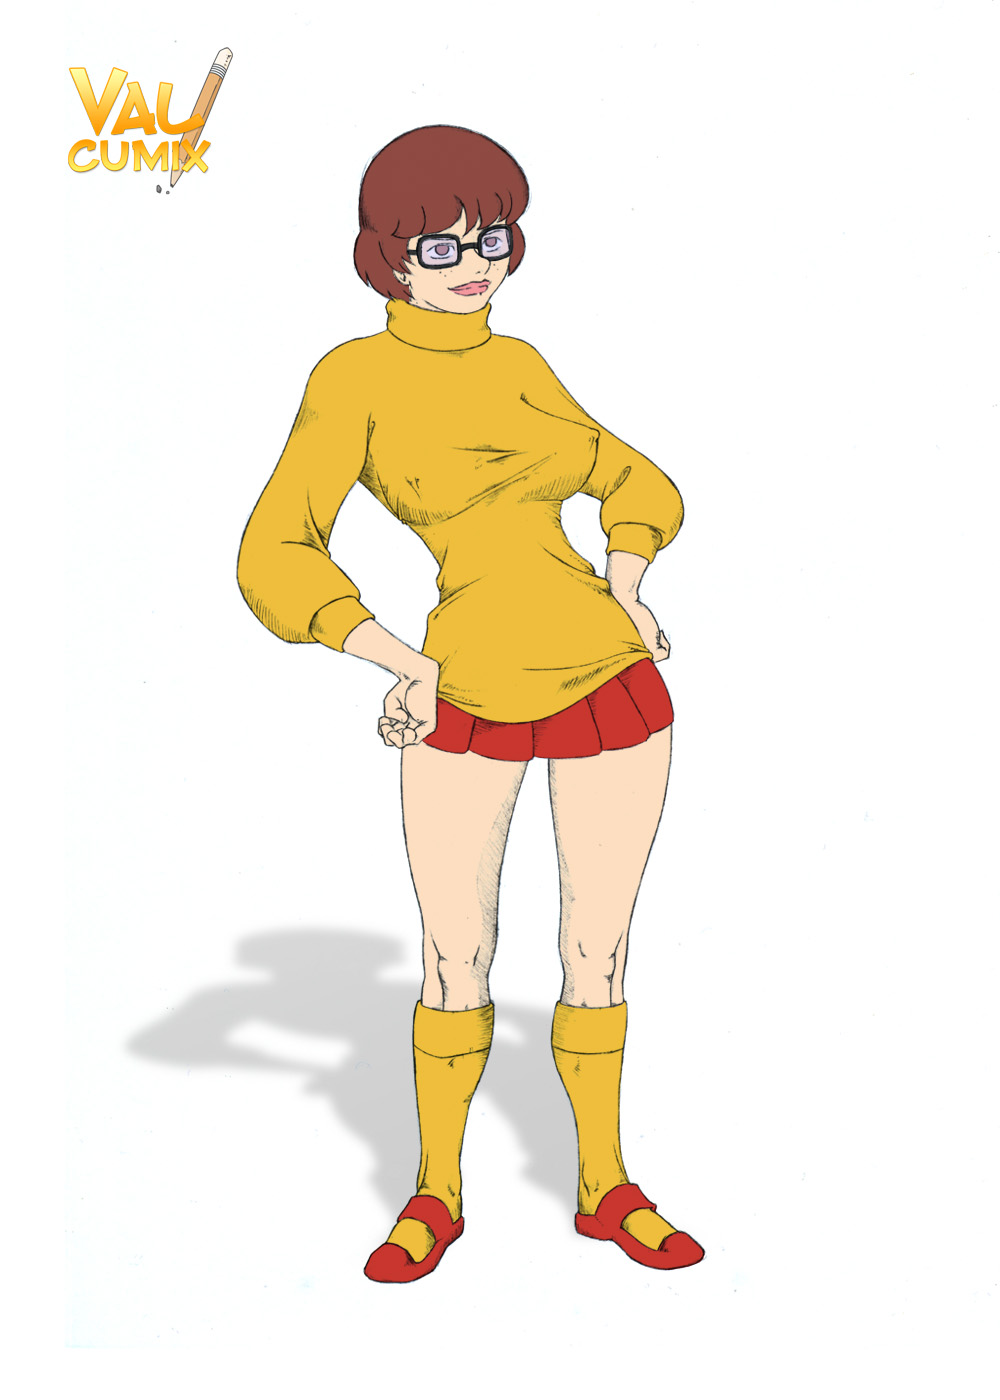 Velma Dinkley and Her Feeling for Scooby Doo by Valcumix